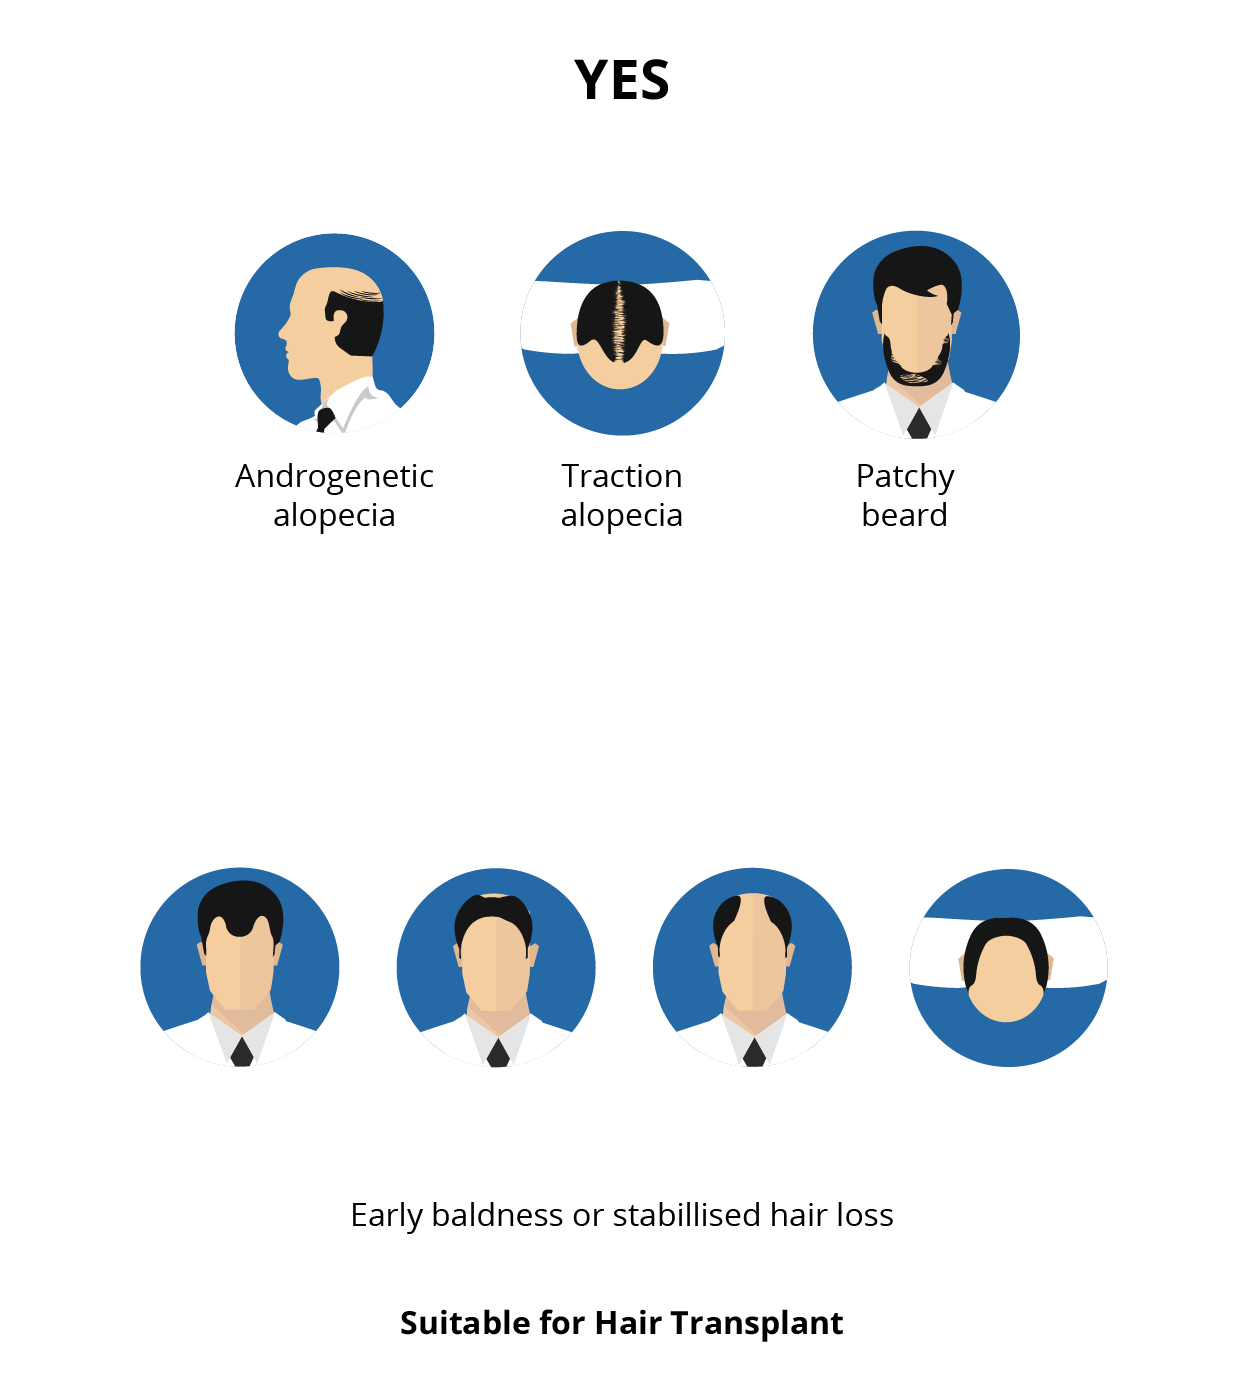 Infographic showing the suitable candidates for the hair transplant